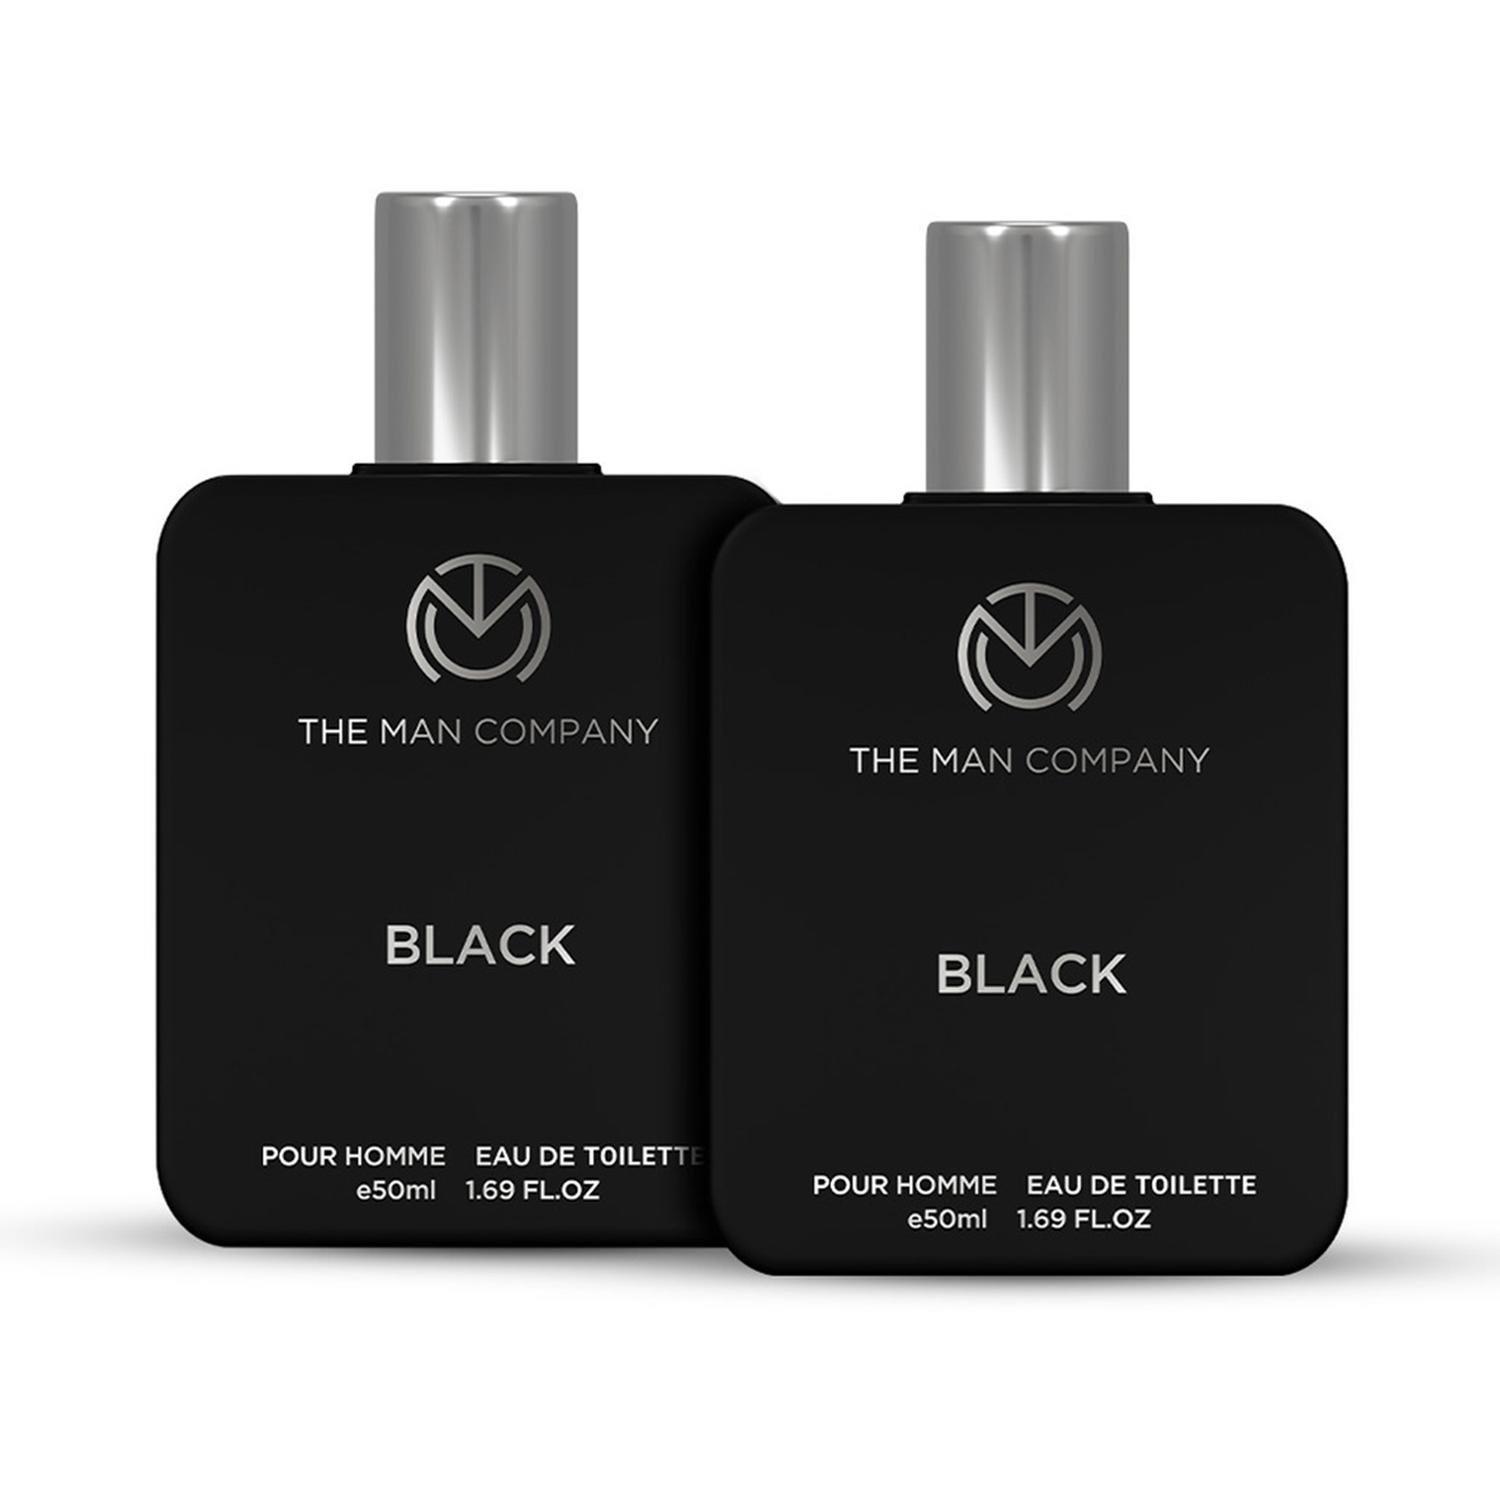 The Man Company | The Man Company Black EDT Perfume for Men - Pack of 2 (50 ml Each)